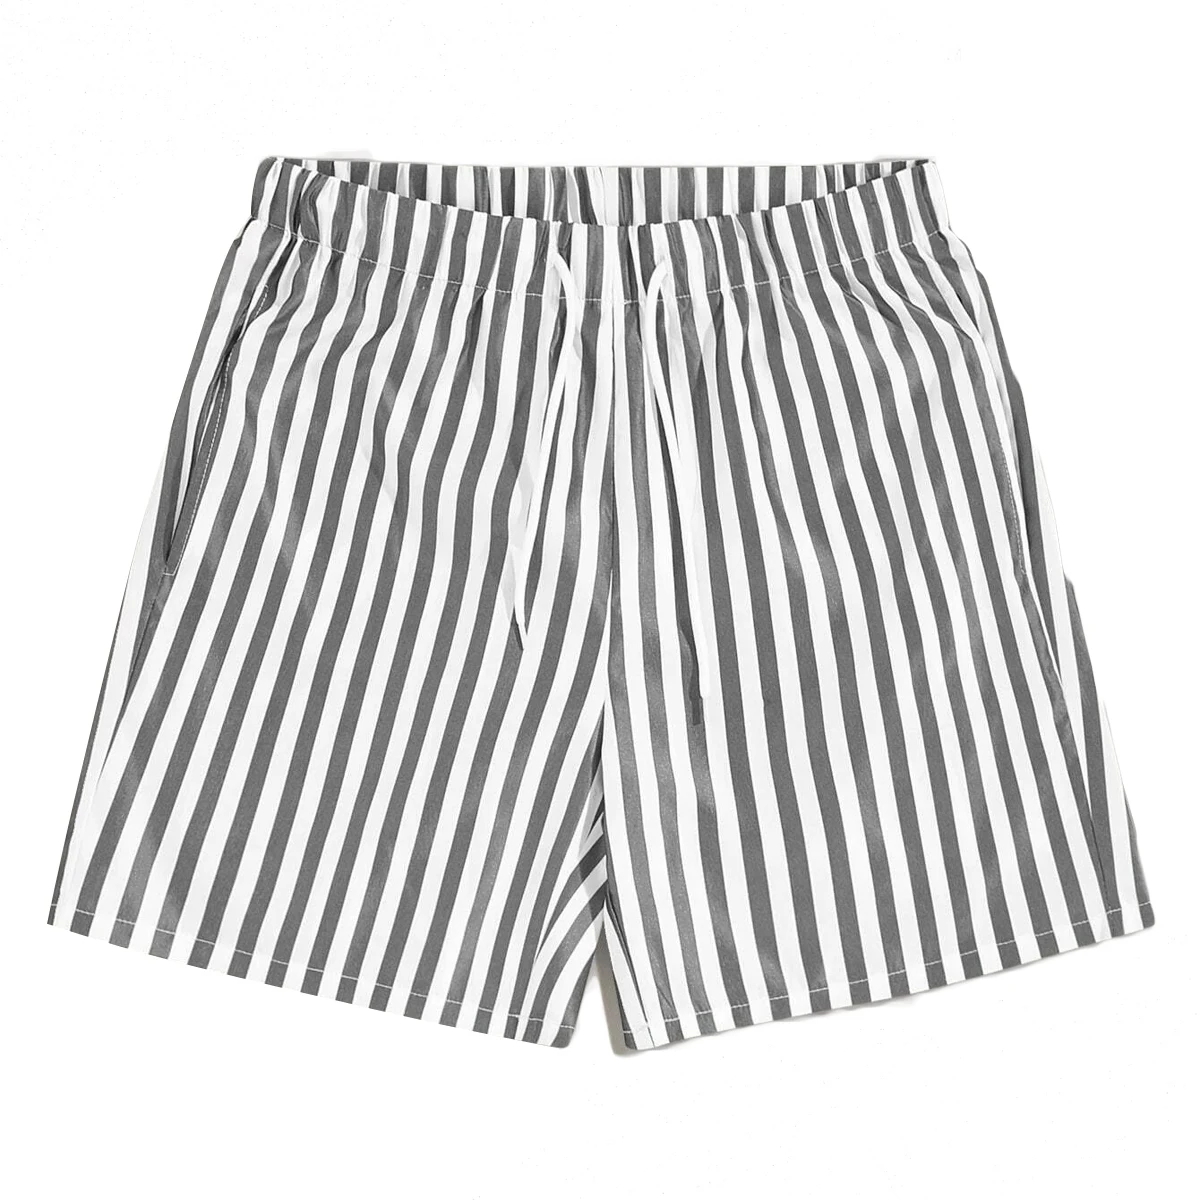 New Fashion Men Summer Casual Shorts Blue White Striped Loose Shorts Beach  Male Causal Striped Shorts Plus Size